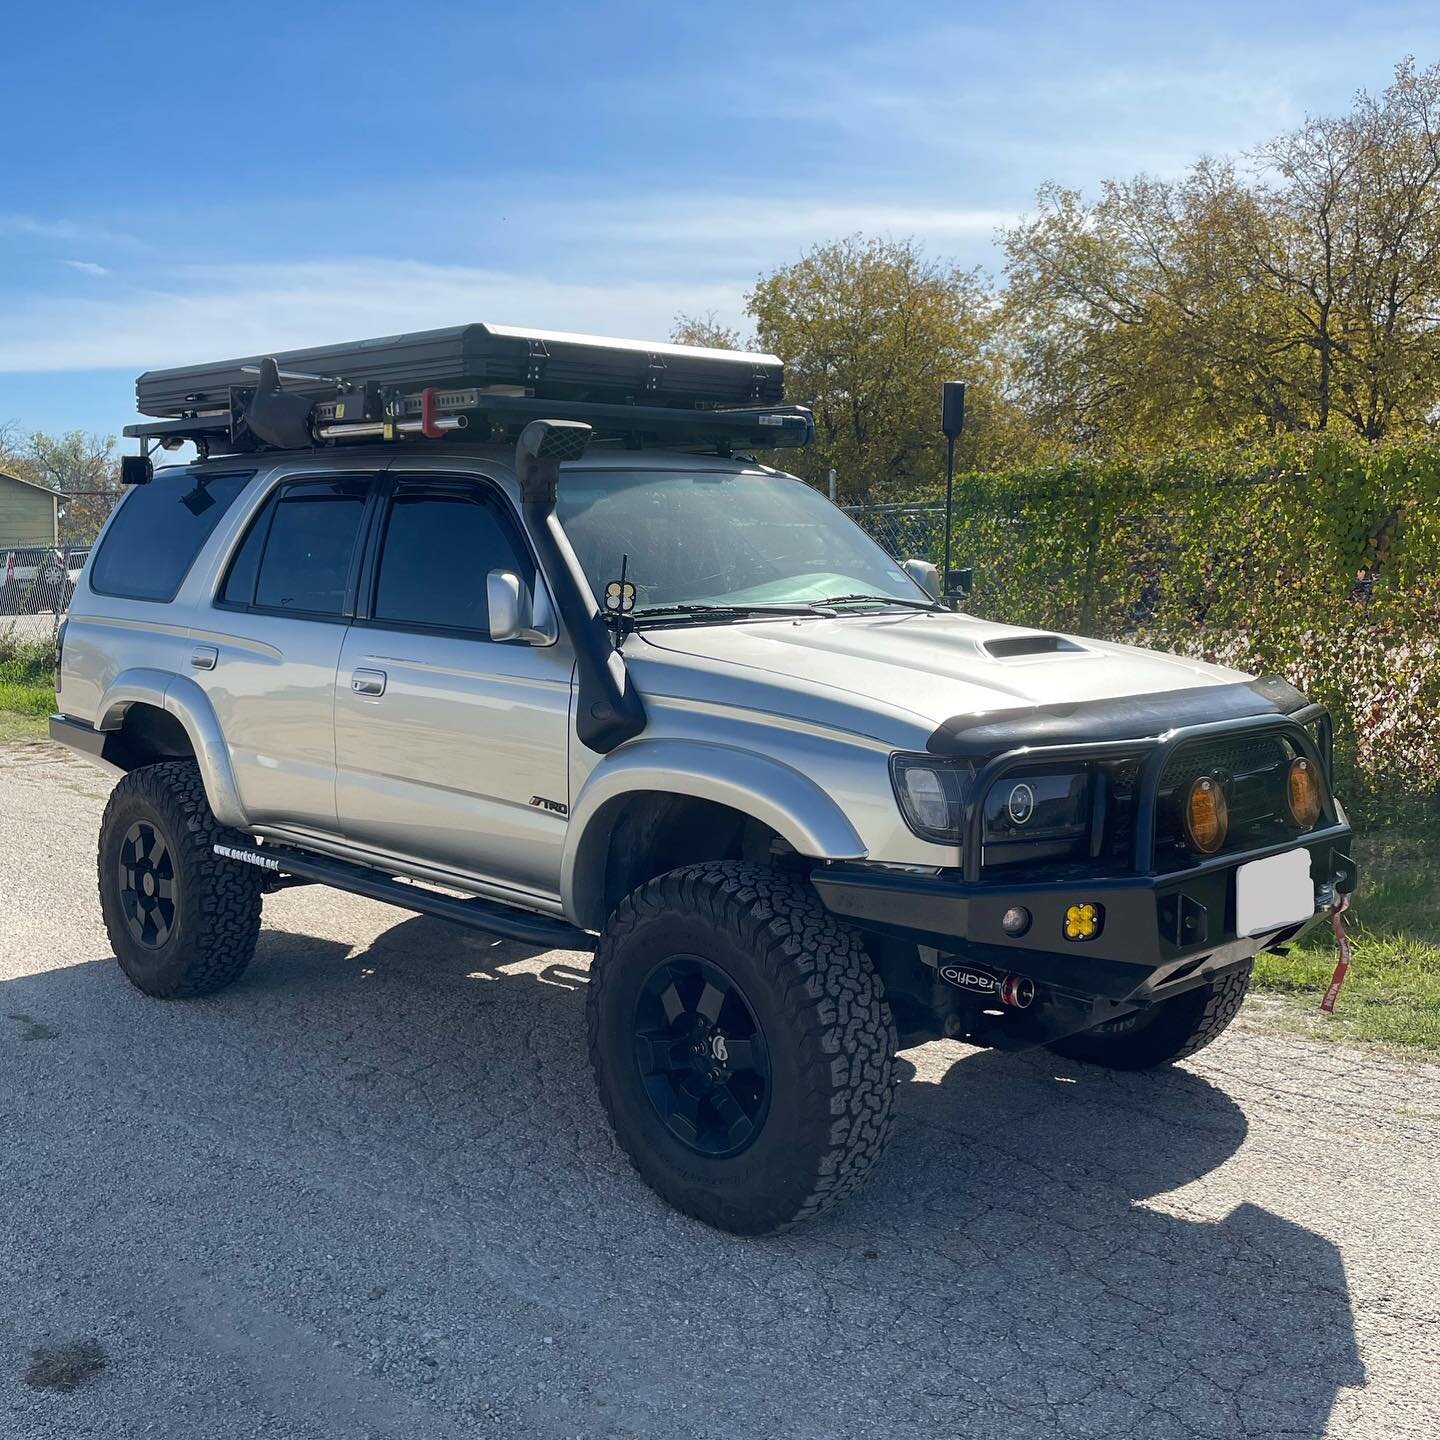 This adventure ready 3rd gen 4runner came in for a bunch of upgrades. @eimkeith rear bumper kit, and control arm bracket reinforcements. @radfloshocks in the front and rear. @gobiracks ladder. Custom trans cooler mount. And more to come!

.
.
.
.
.
.